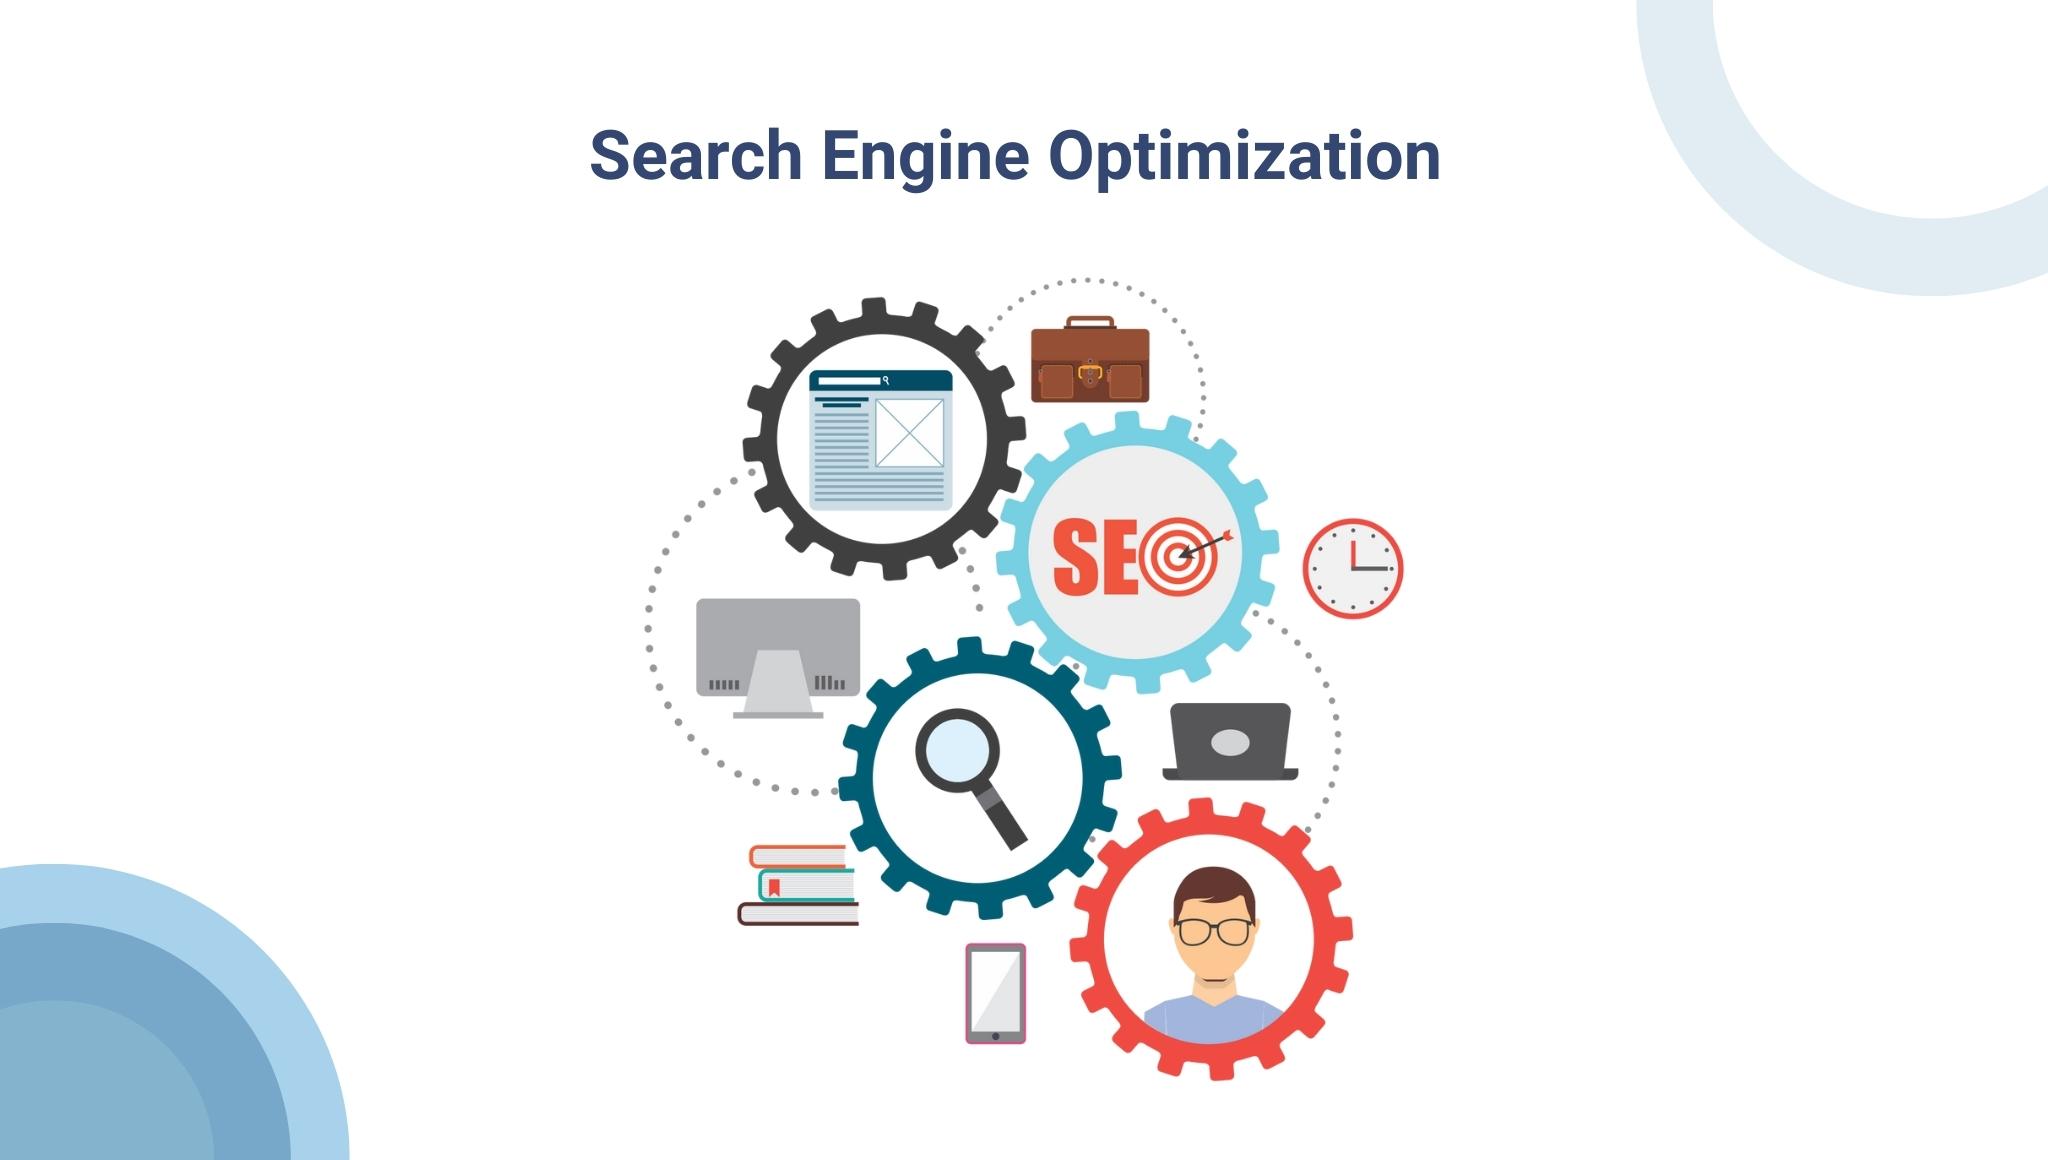 What Is SEO?